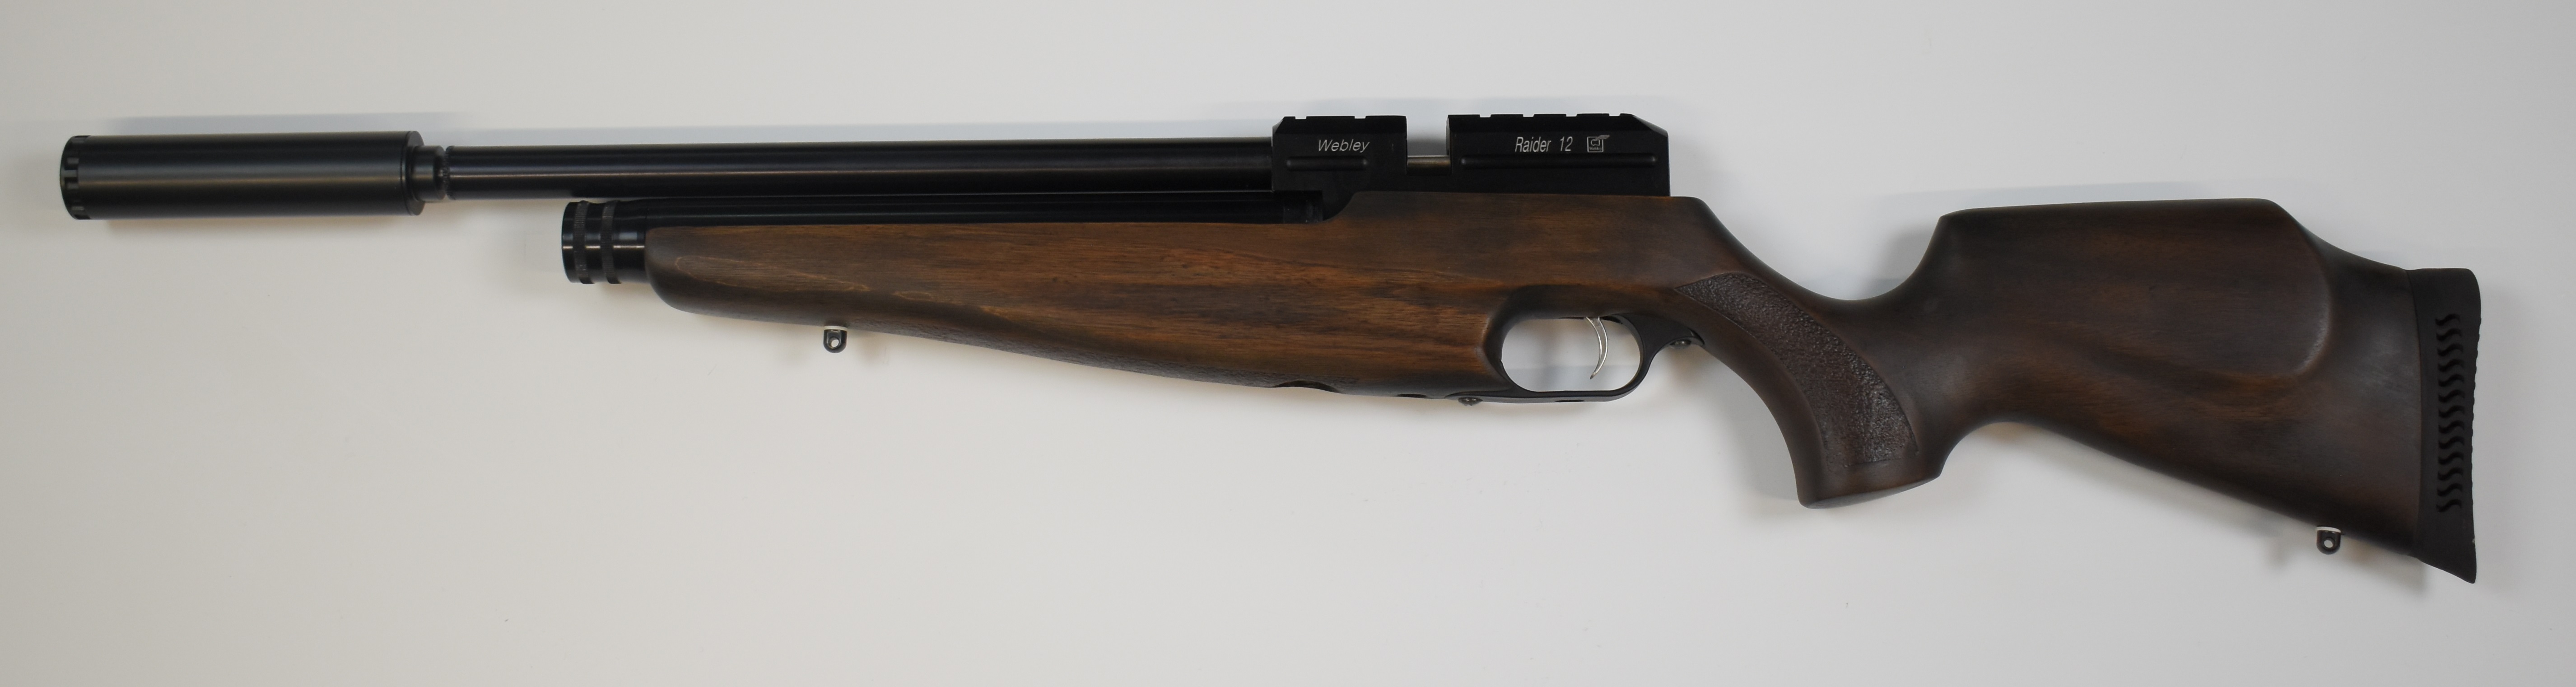 Webley Raider 12 .22 PCP air rifle with aluminium carbine cylinder, textured semi-pistol grip and - Image 6 of 11